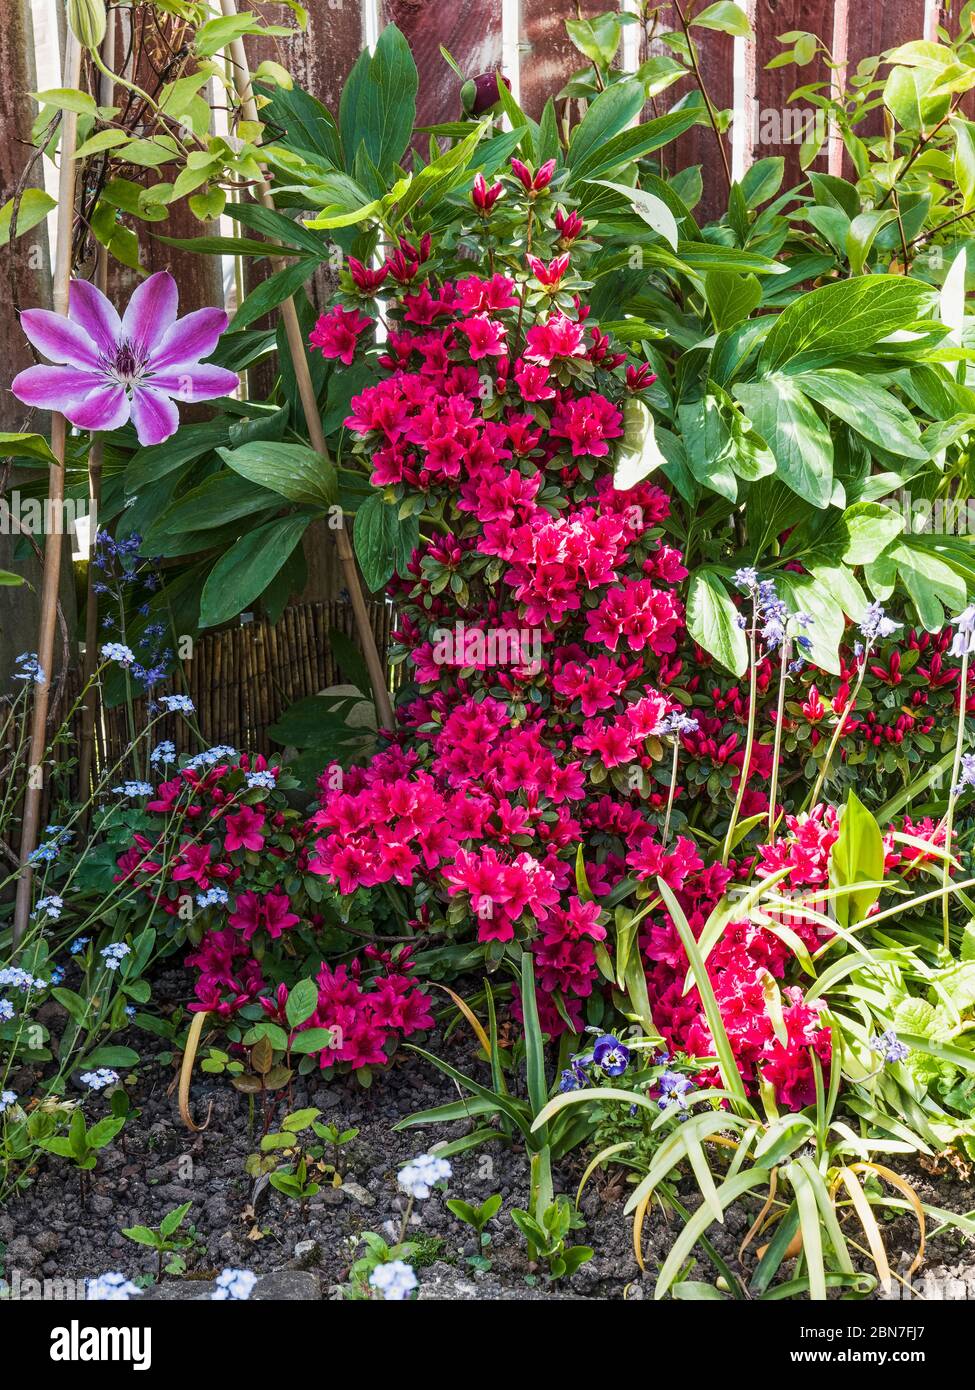 Flowering azalea and clematis plants in a spring garden Stock Photo